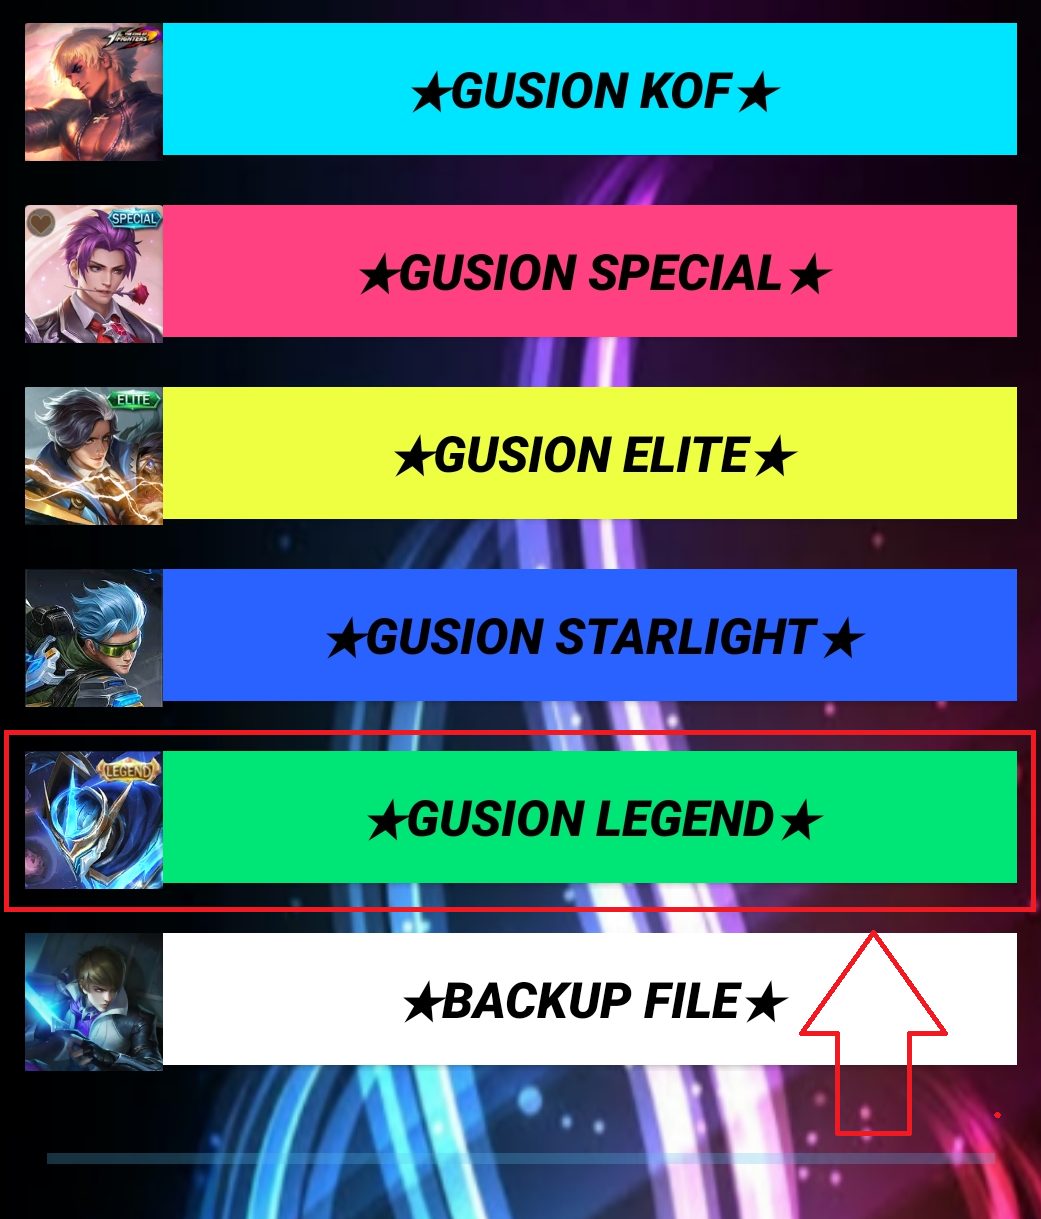 How to Get Free Gusion Legend Skin Mobile Legends 2020 - Moonton Free Skins